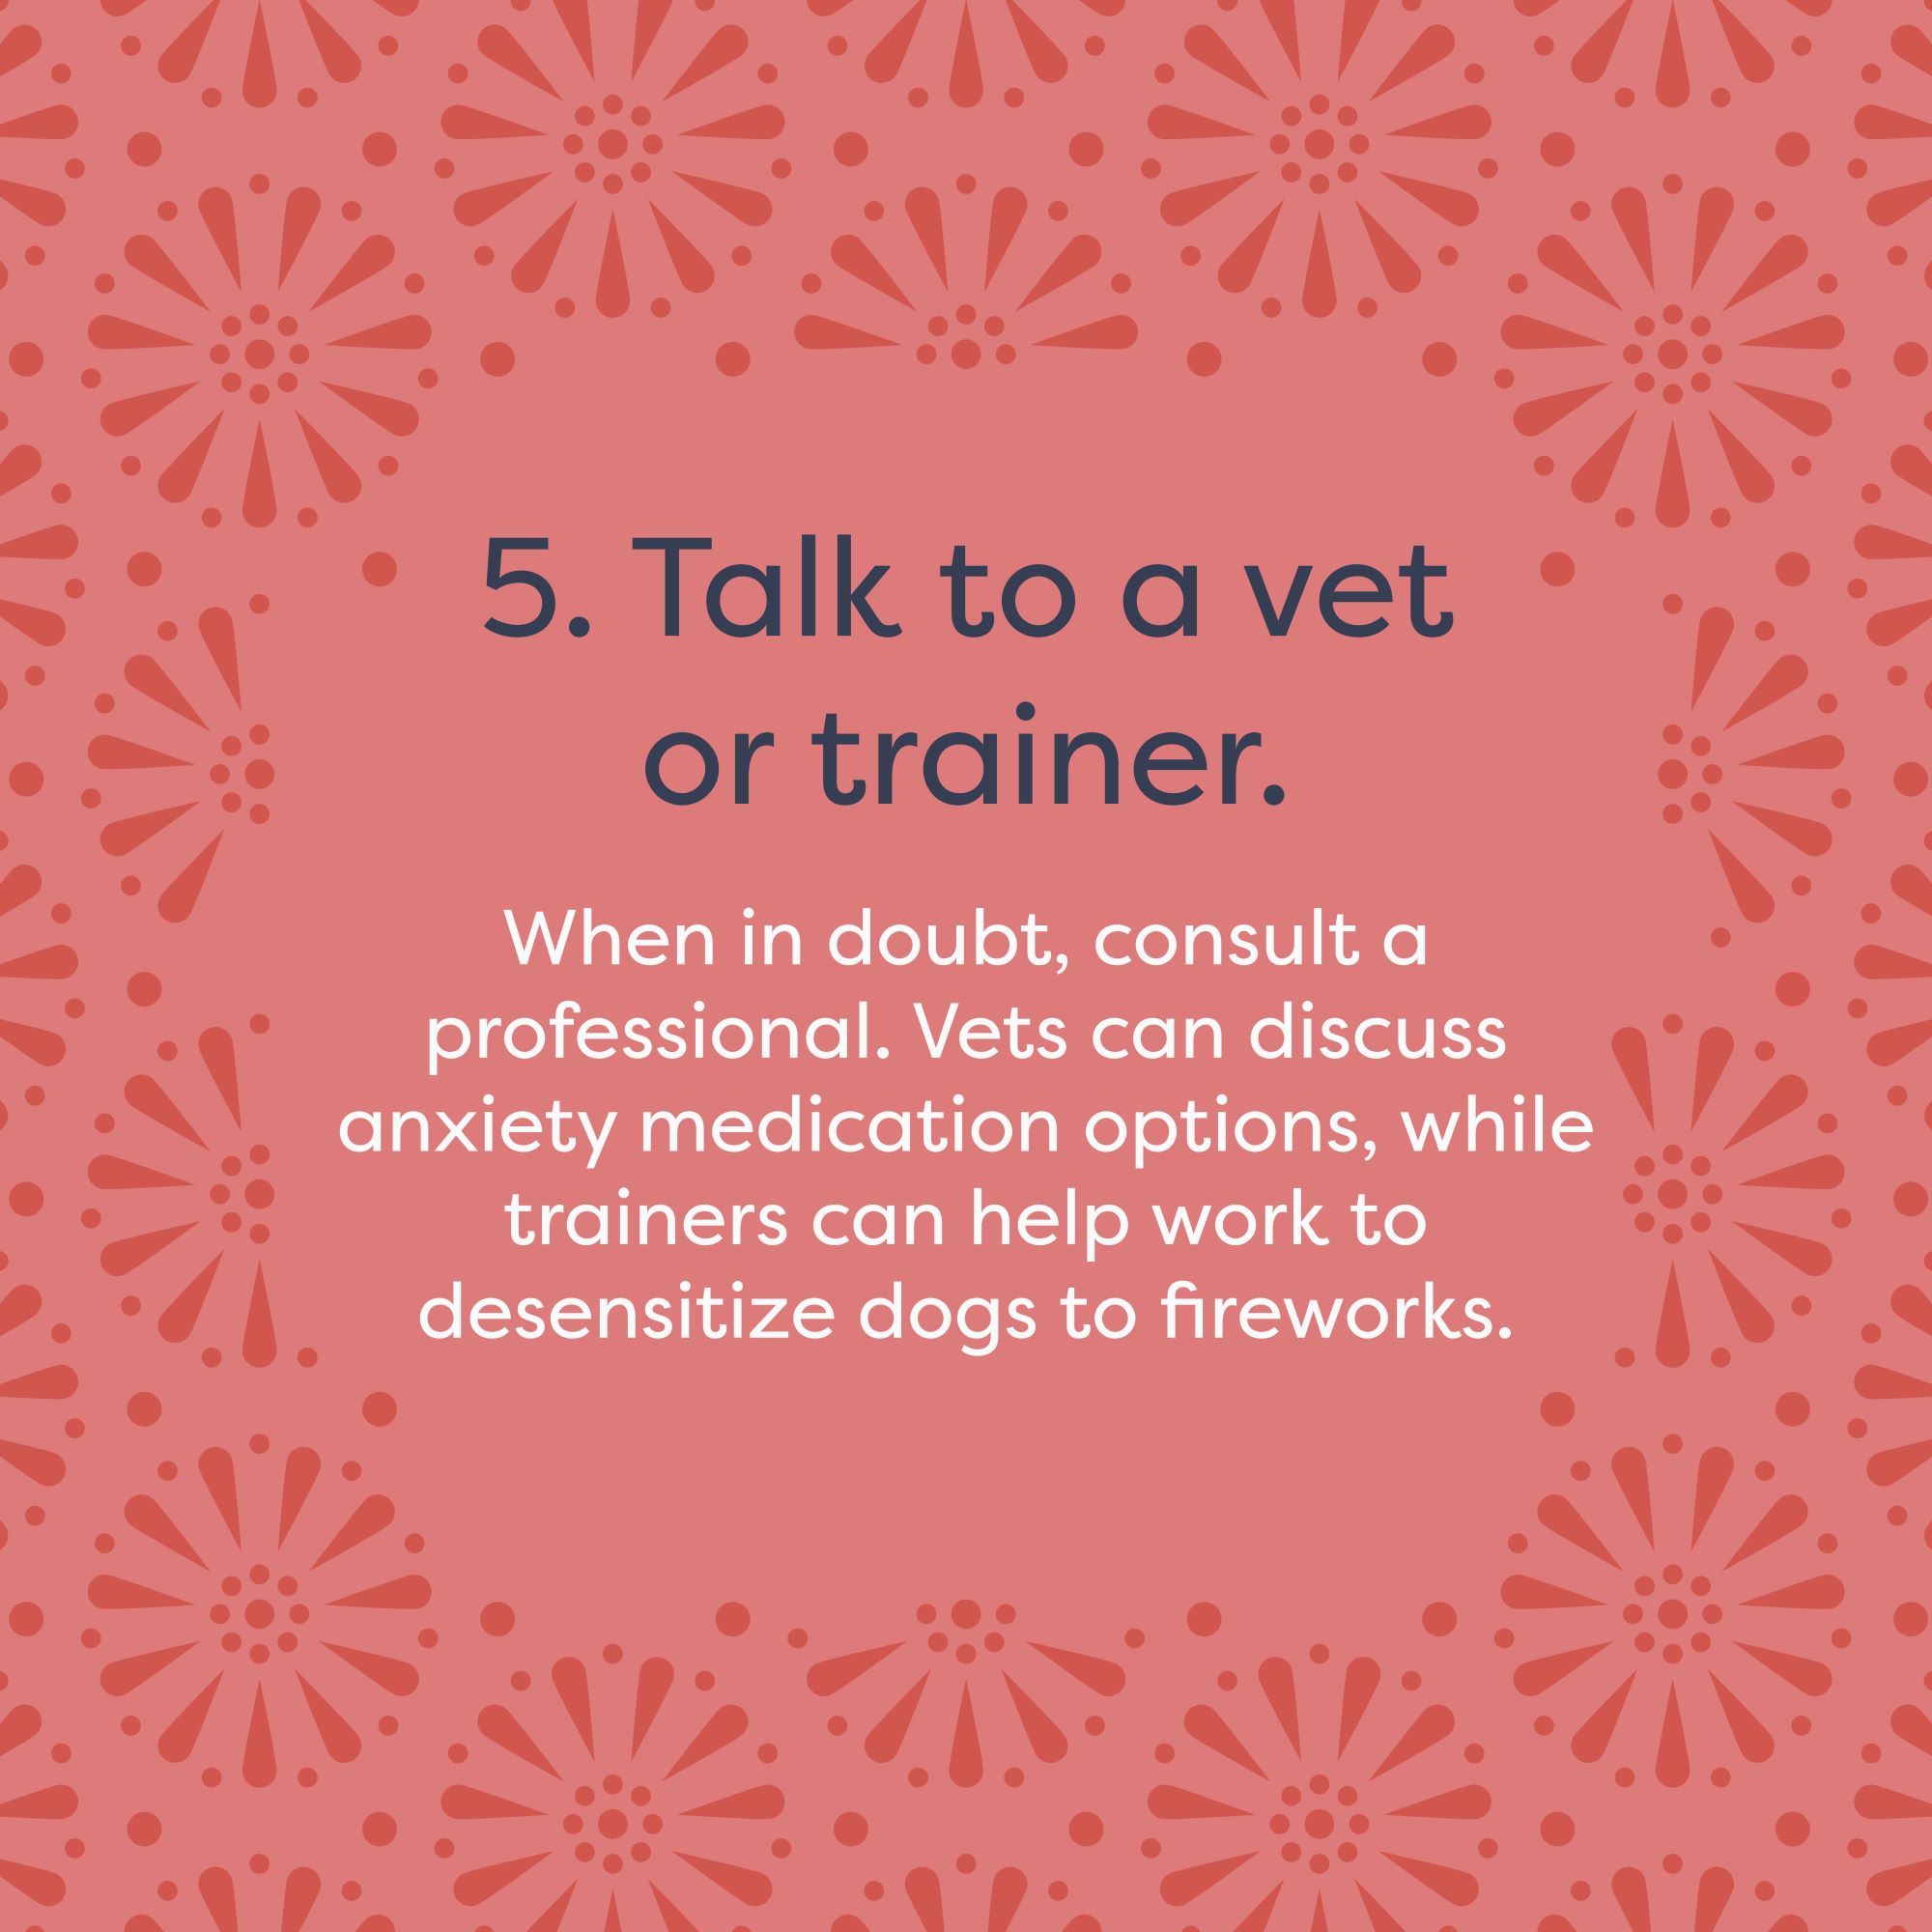 dog firework anxiety tips - talk to a vet or trainer